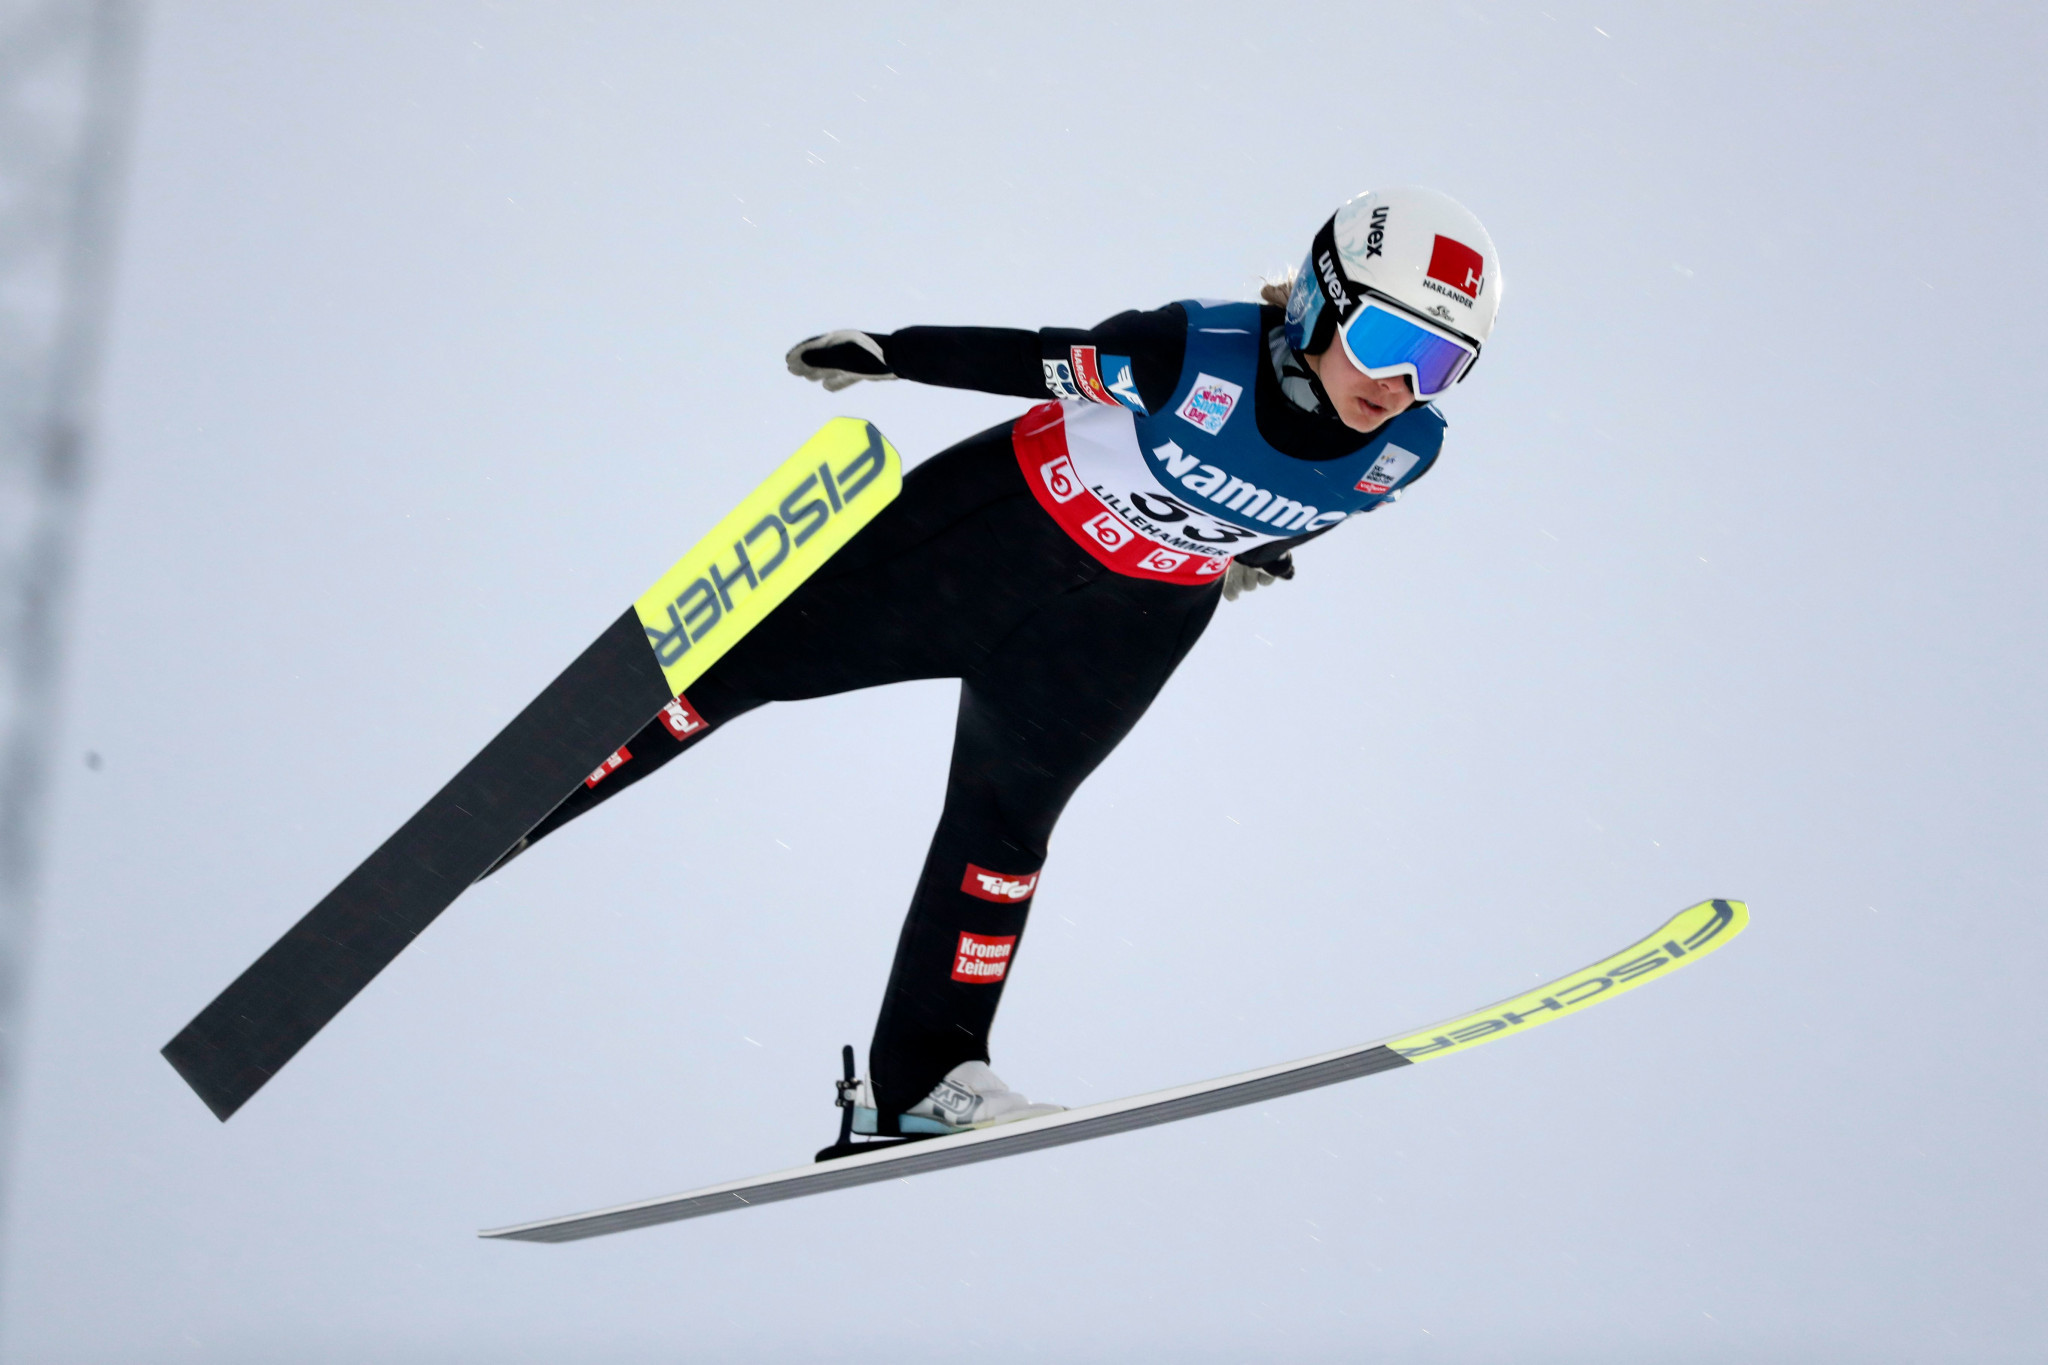 Hölzl wins first of back-to-back Ski Jumping World Cup events in Oberstdorf